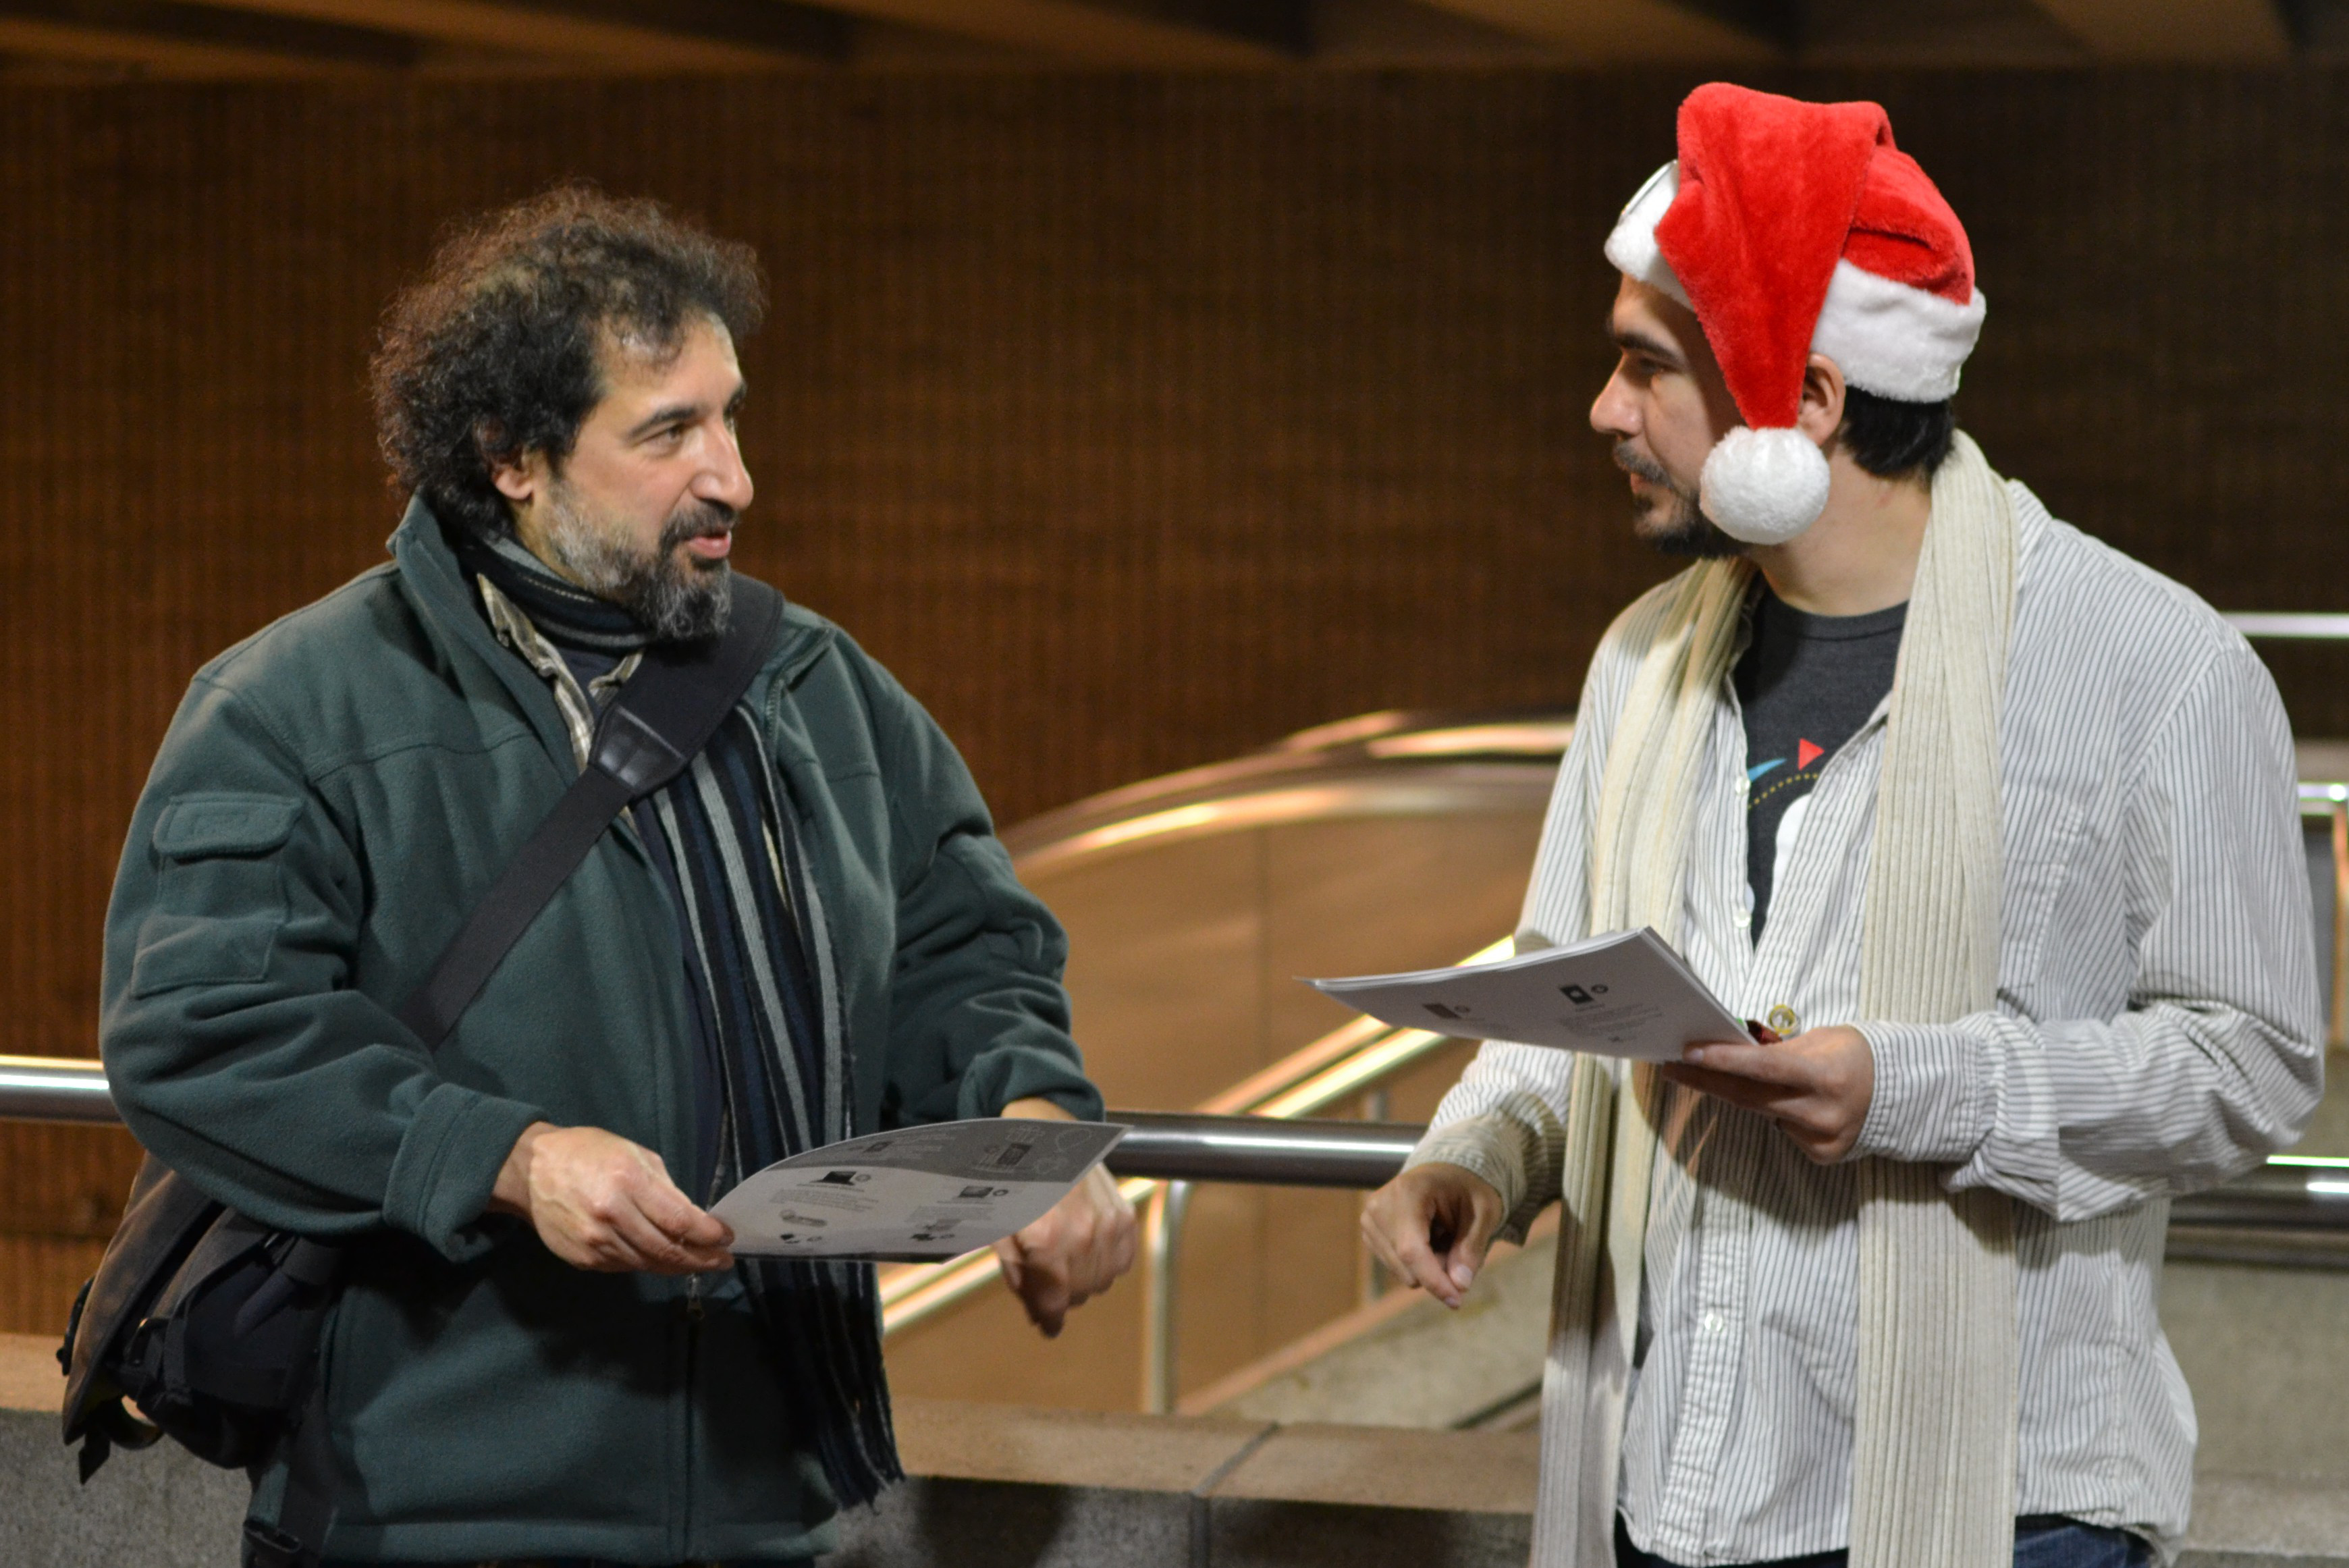 FSF system administrator Ruben Rodriguez chats with a passerby at the FSF's Giving Guide Giveaway in Somerville, MA